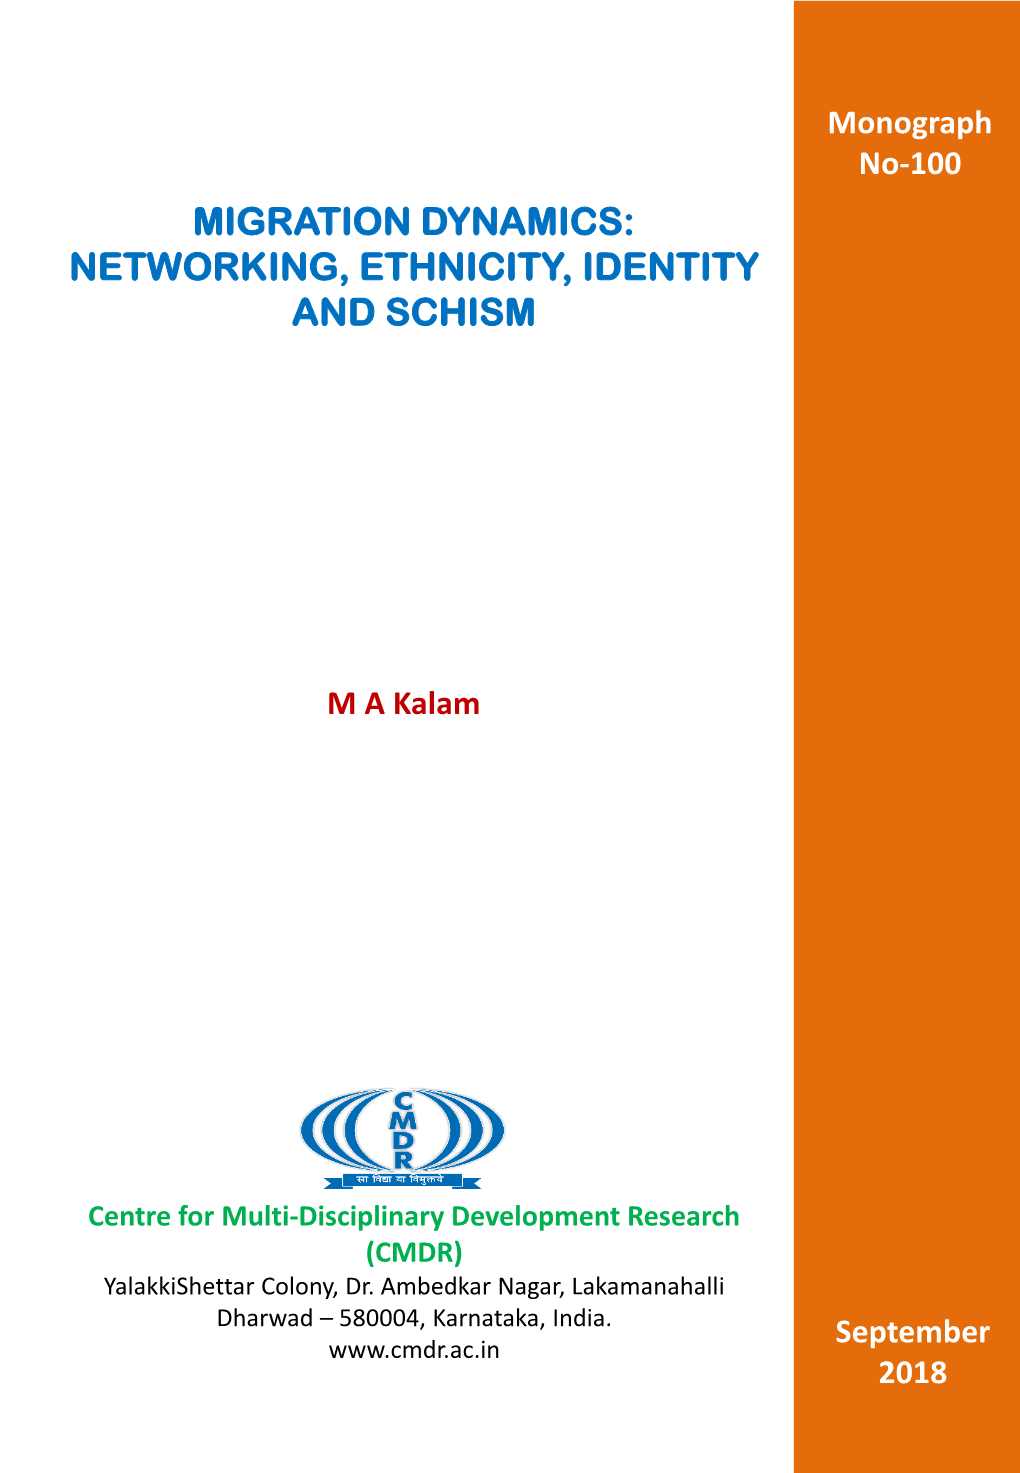 Migration Dynamics: Networking, Ethnicity, Identity and Schism